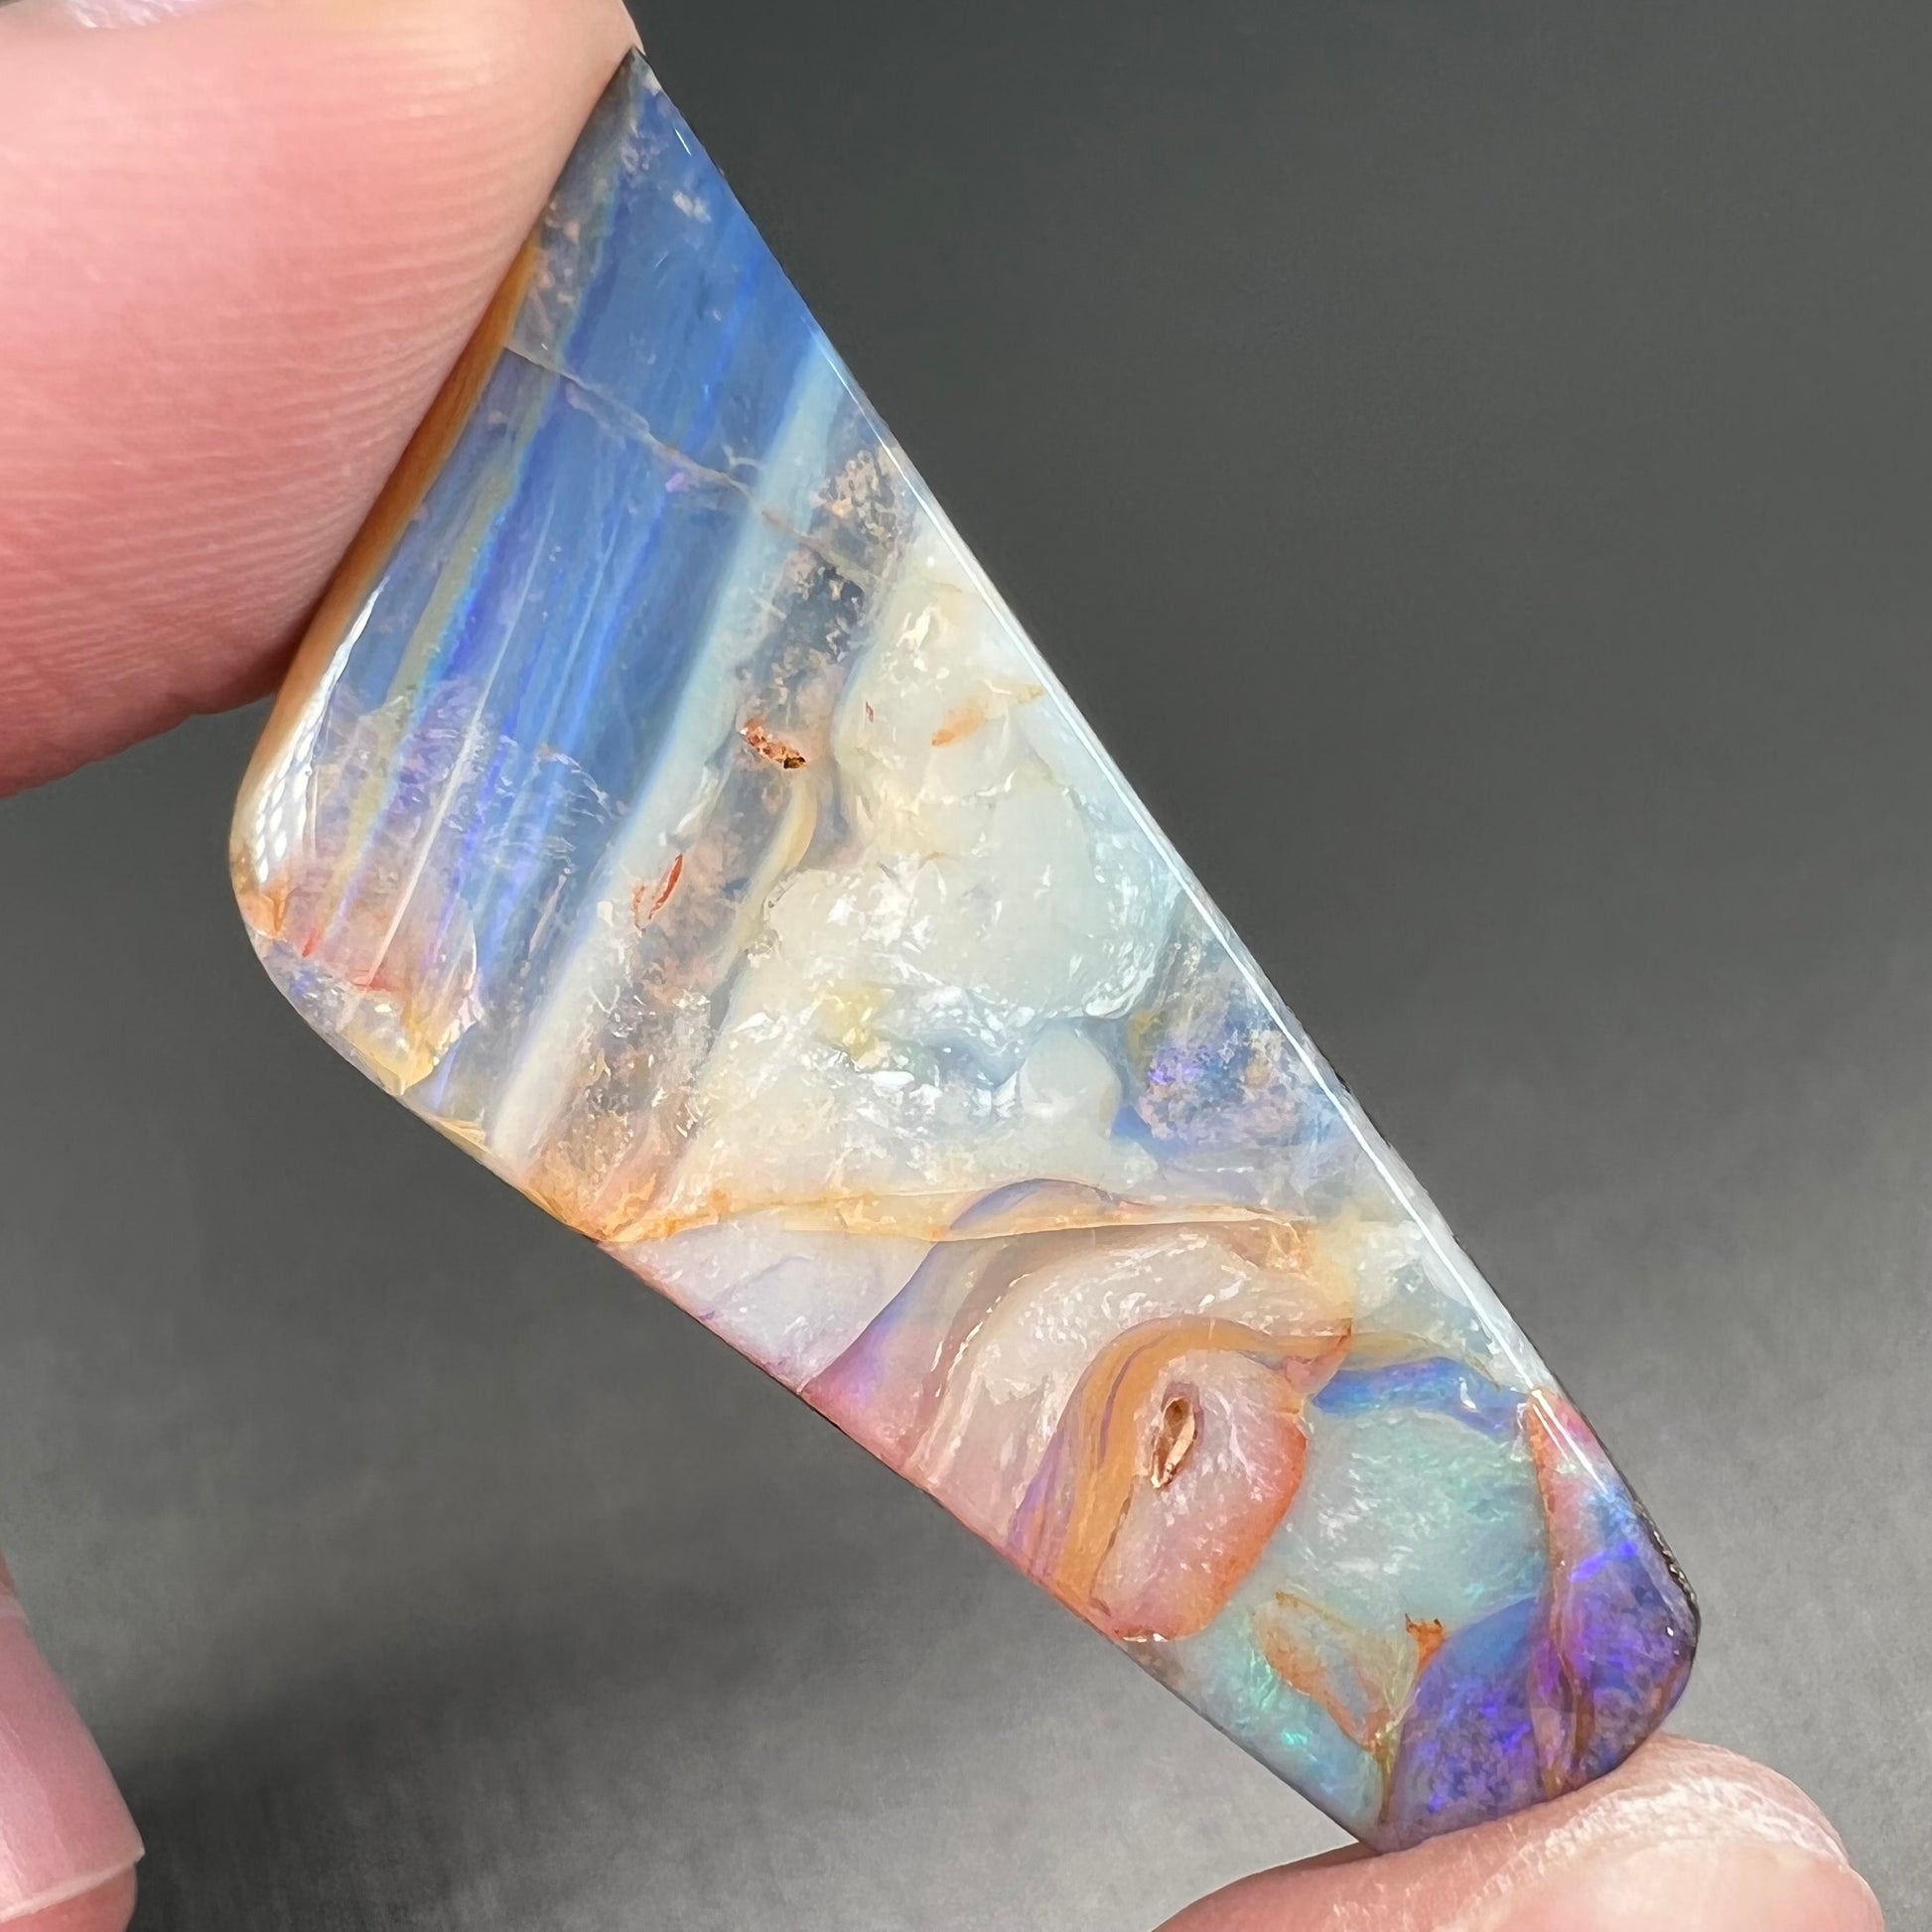 A loose, freeform cut, patterned Quilpie boulder opal stone from Queensland, Australia.